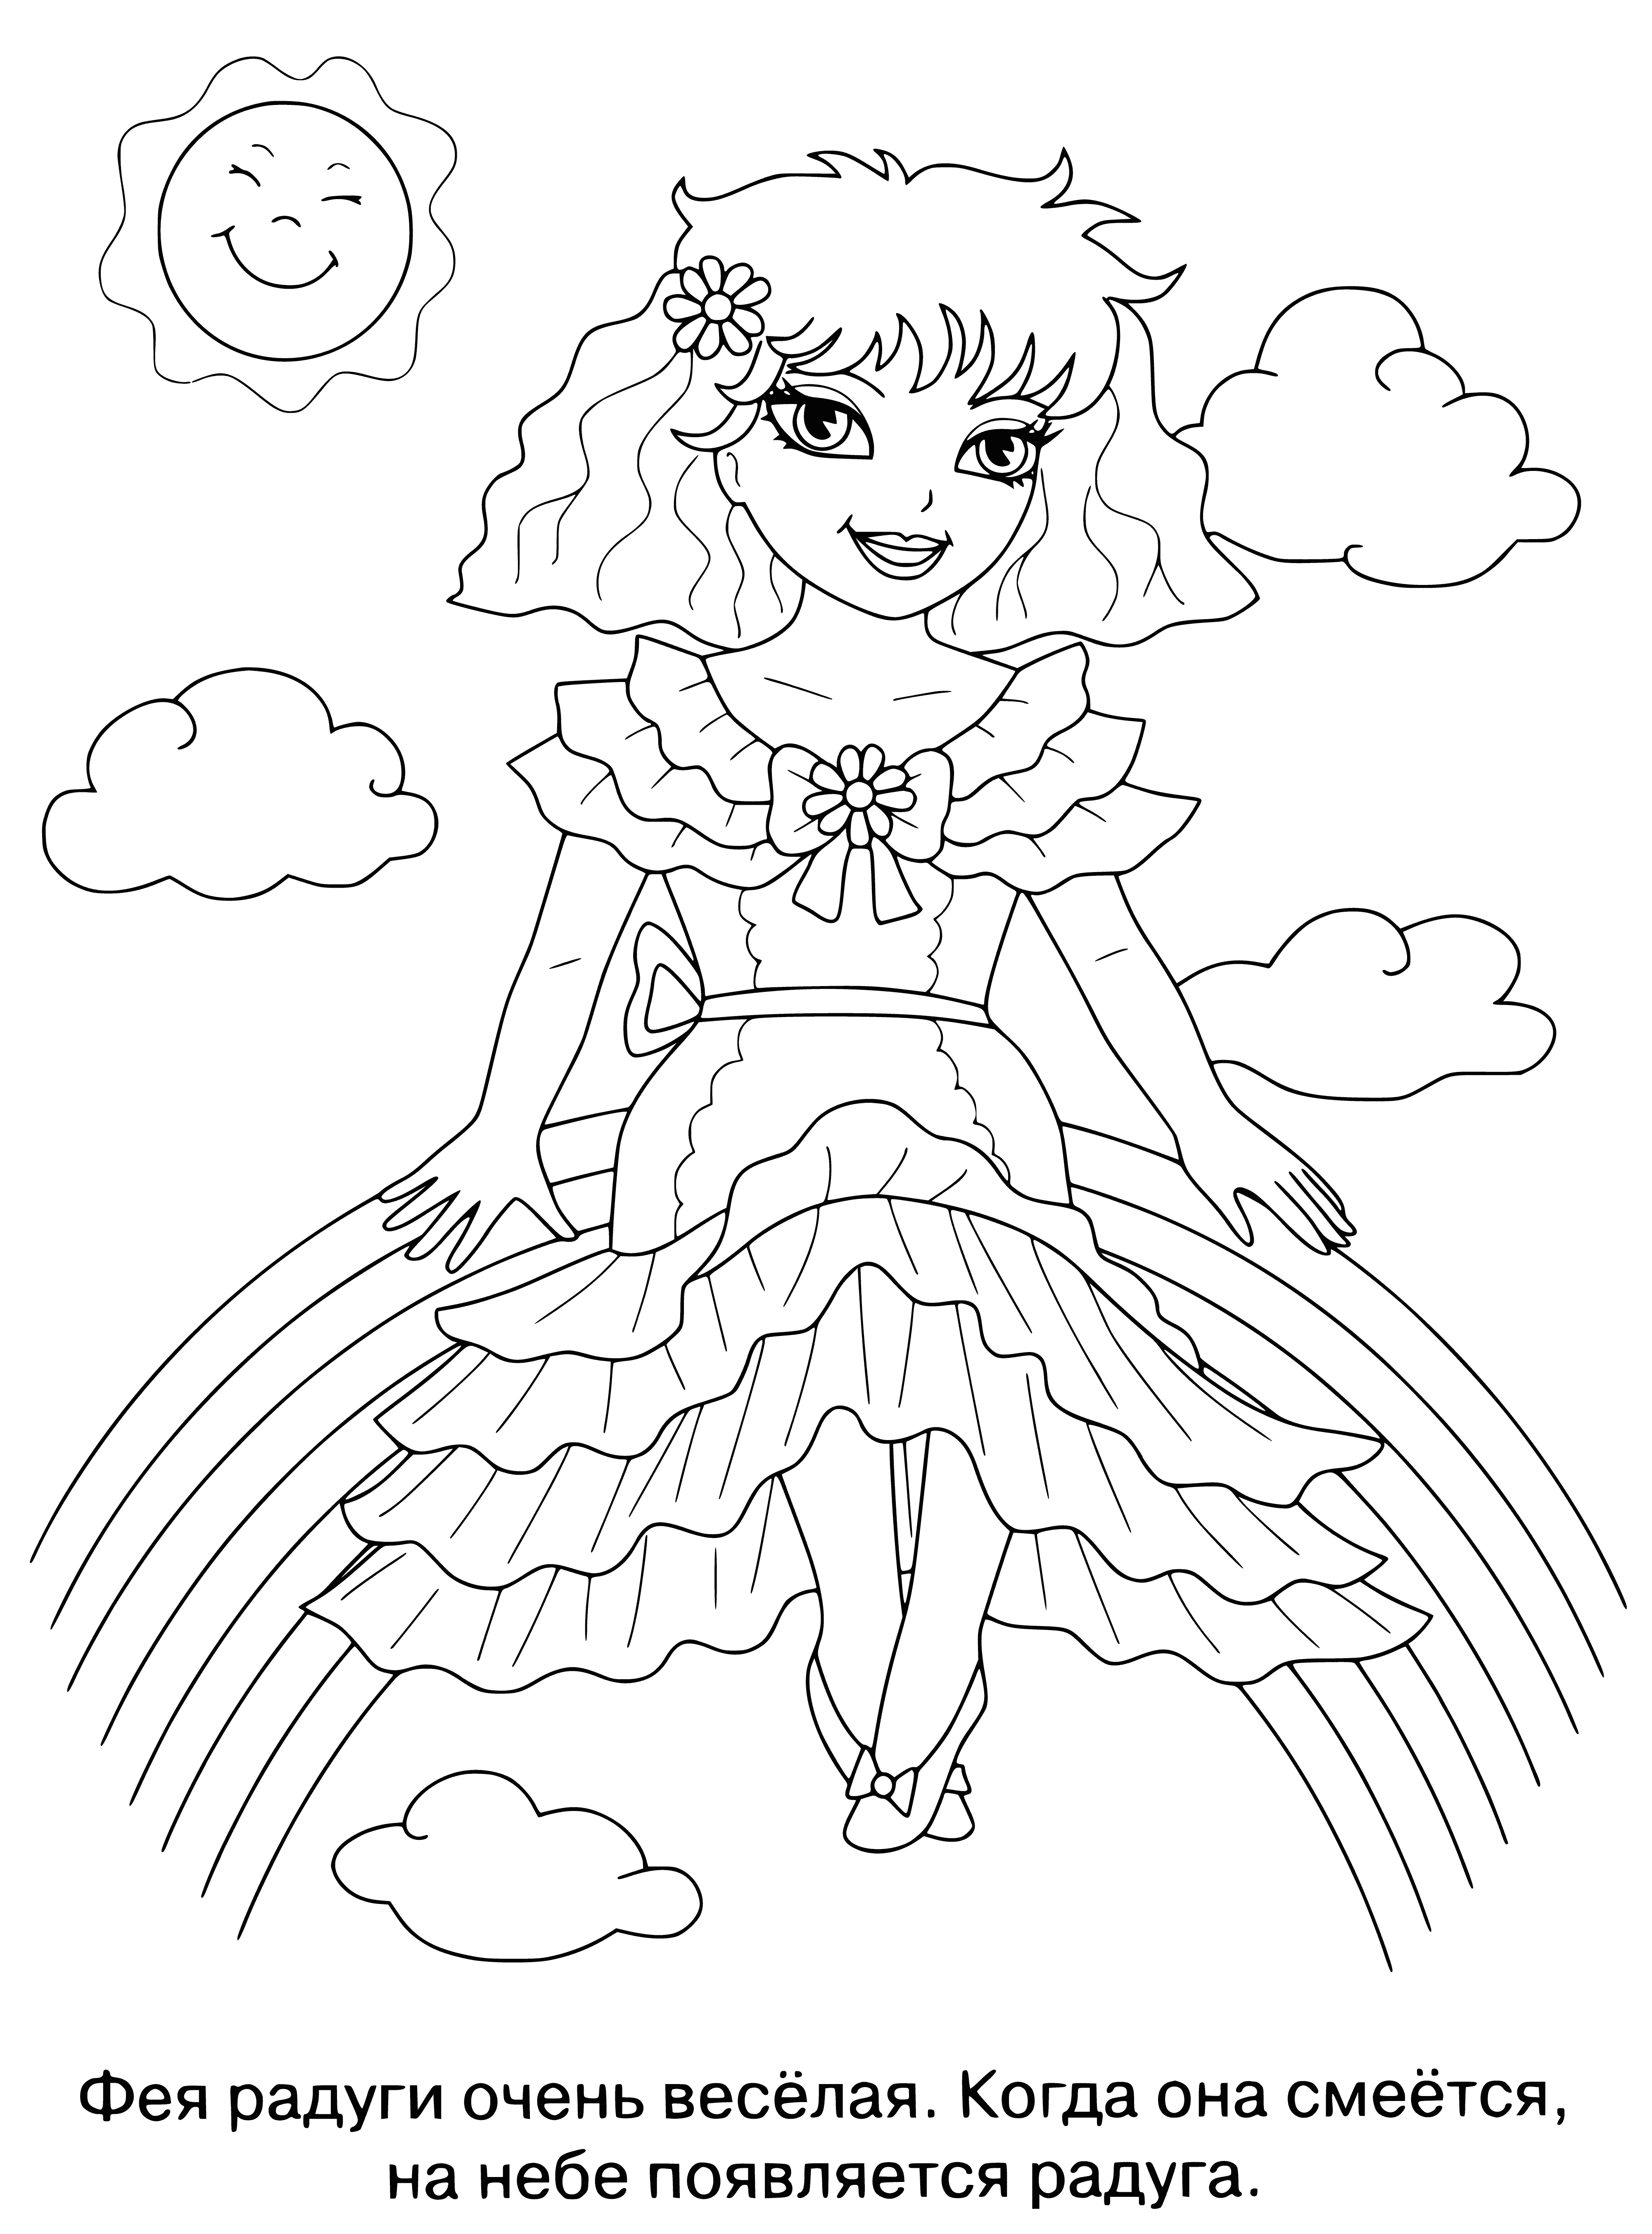 coloring page: Fairy in the center of a color page surrounded by creatures & animals; a unicorn, dragon, frog, butterfly & more, colorful & in a forest with a wand & rainbow.